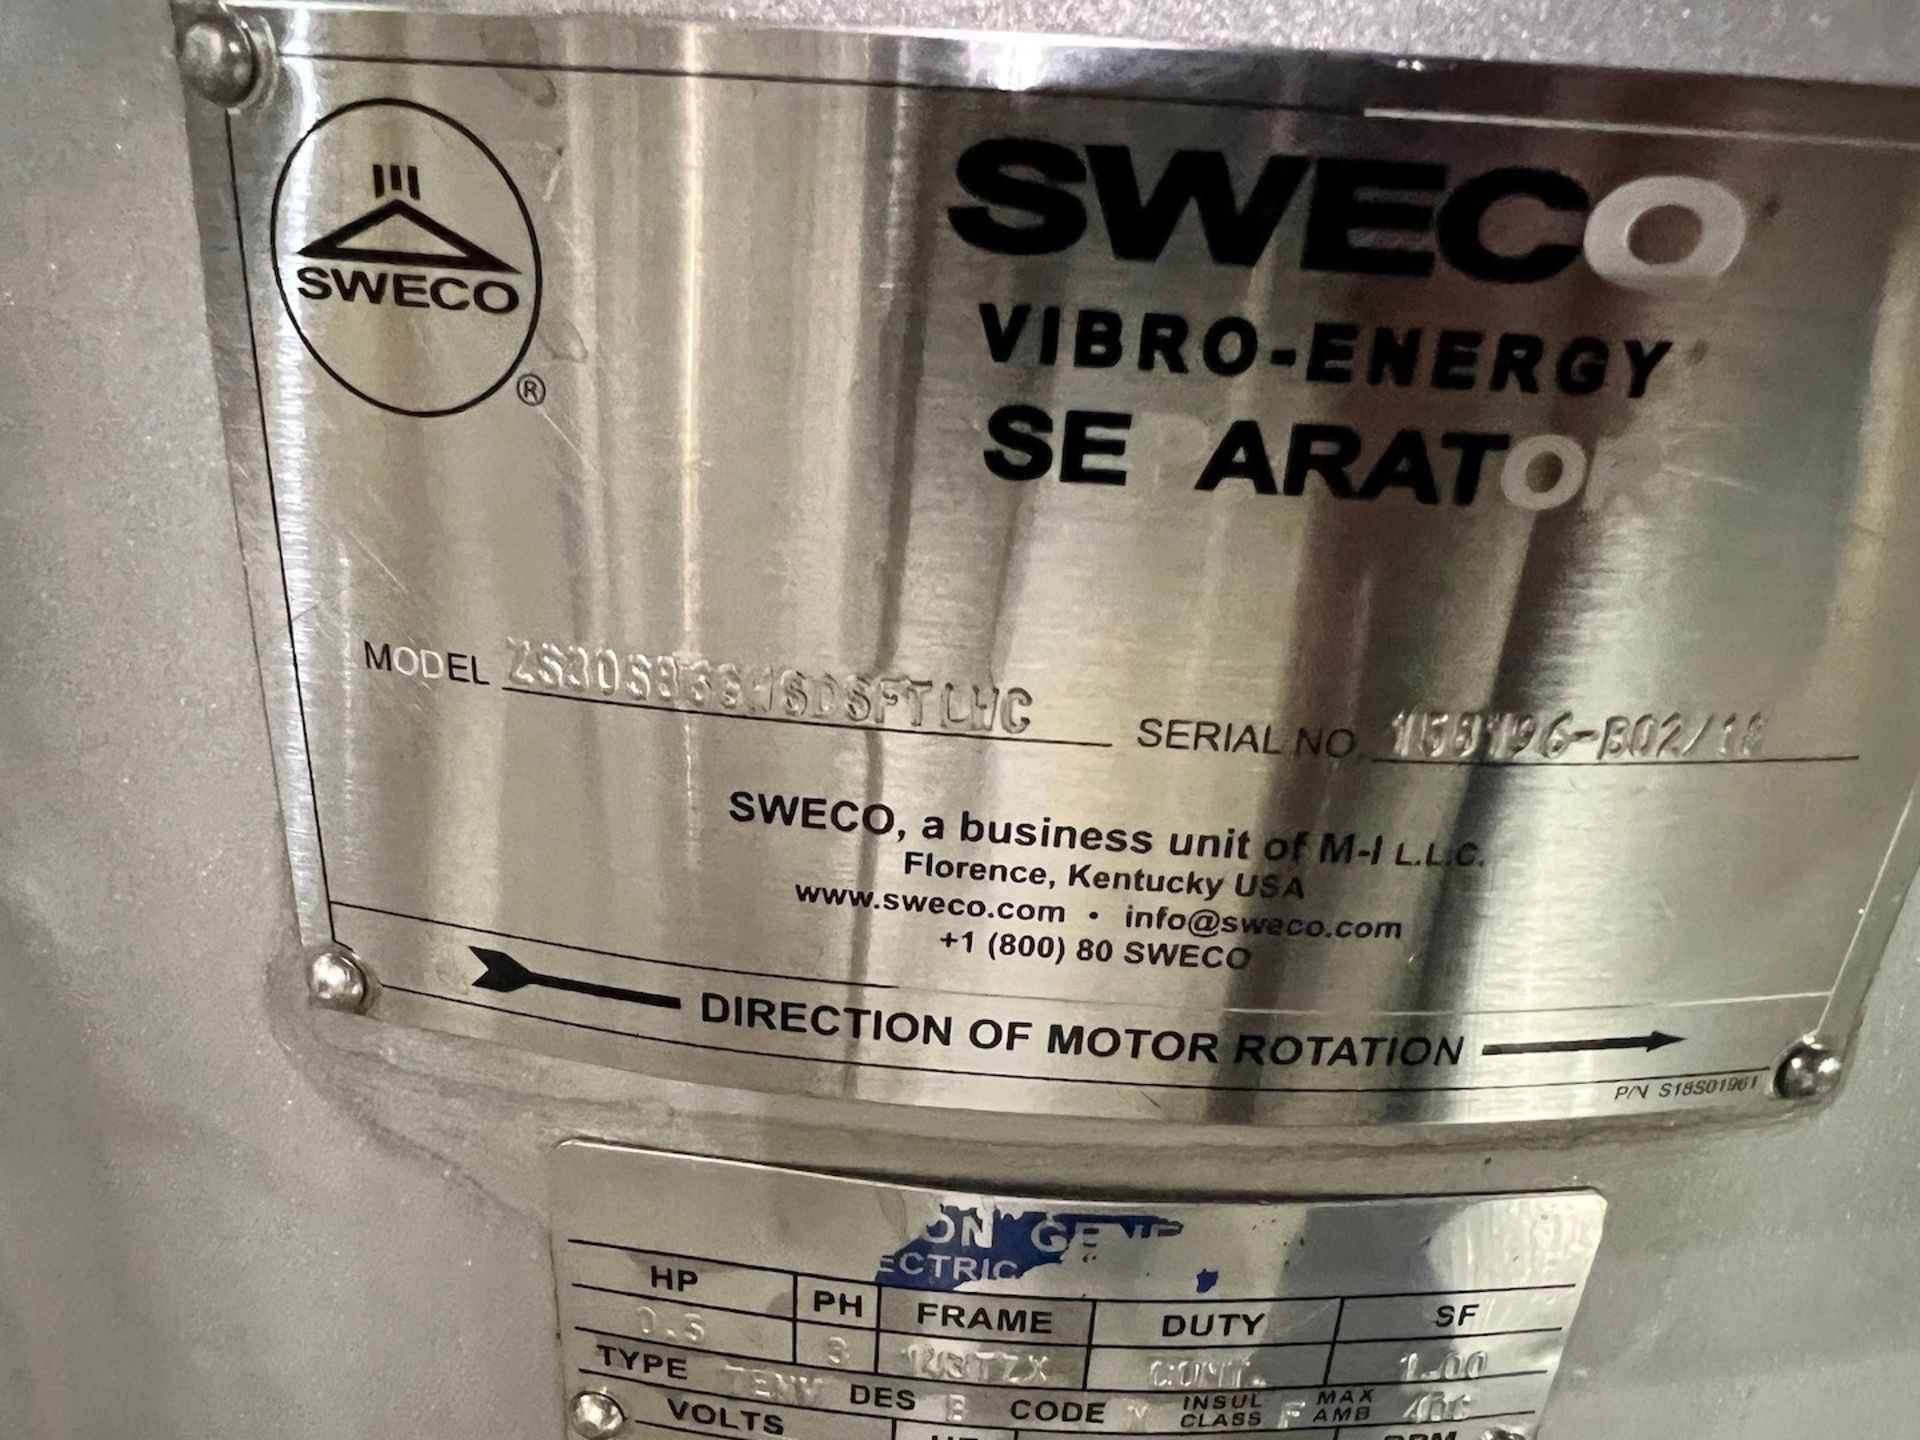 SWECO VIBRO-ENERGY APPROX 32 IN. W SEPARATOR, MODEL ZS30586GHSDSFTLHC, S/N 158196-B02/18, 1/2 HP ( - Image 5 of 5